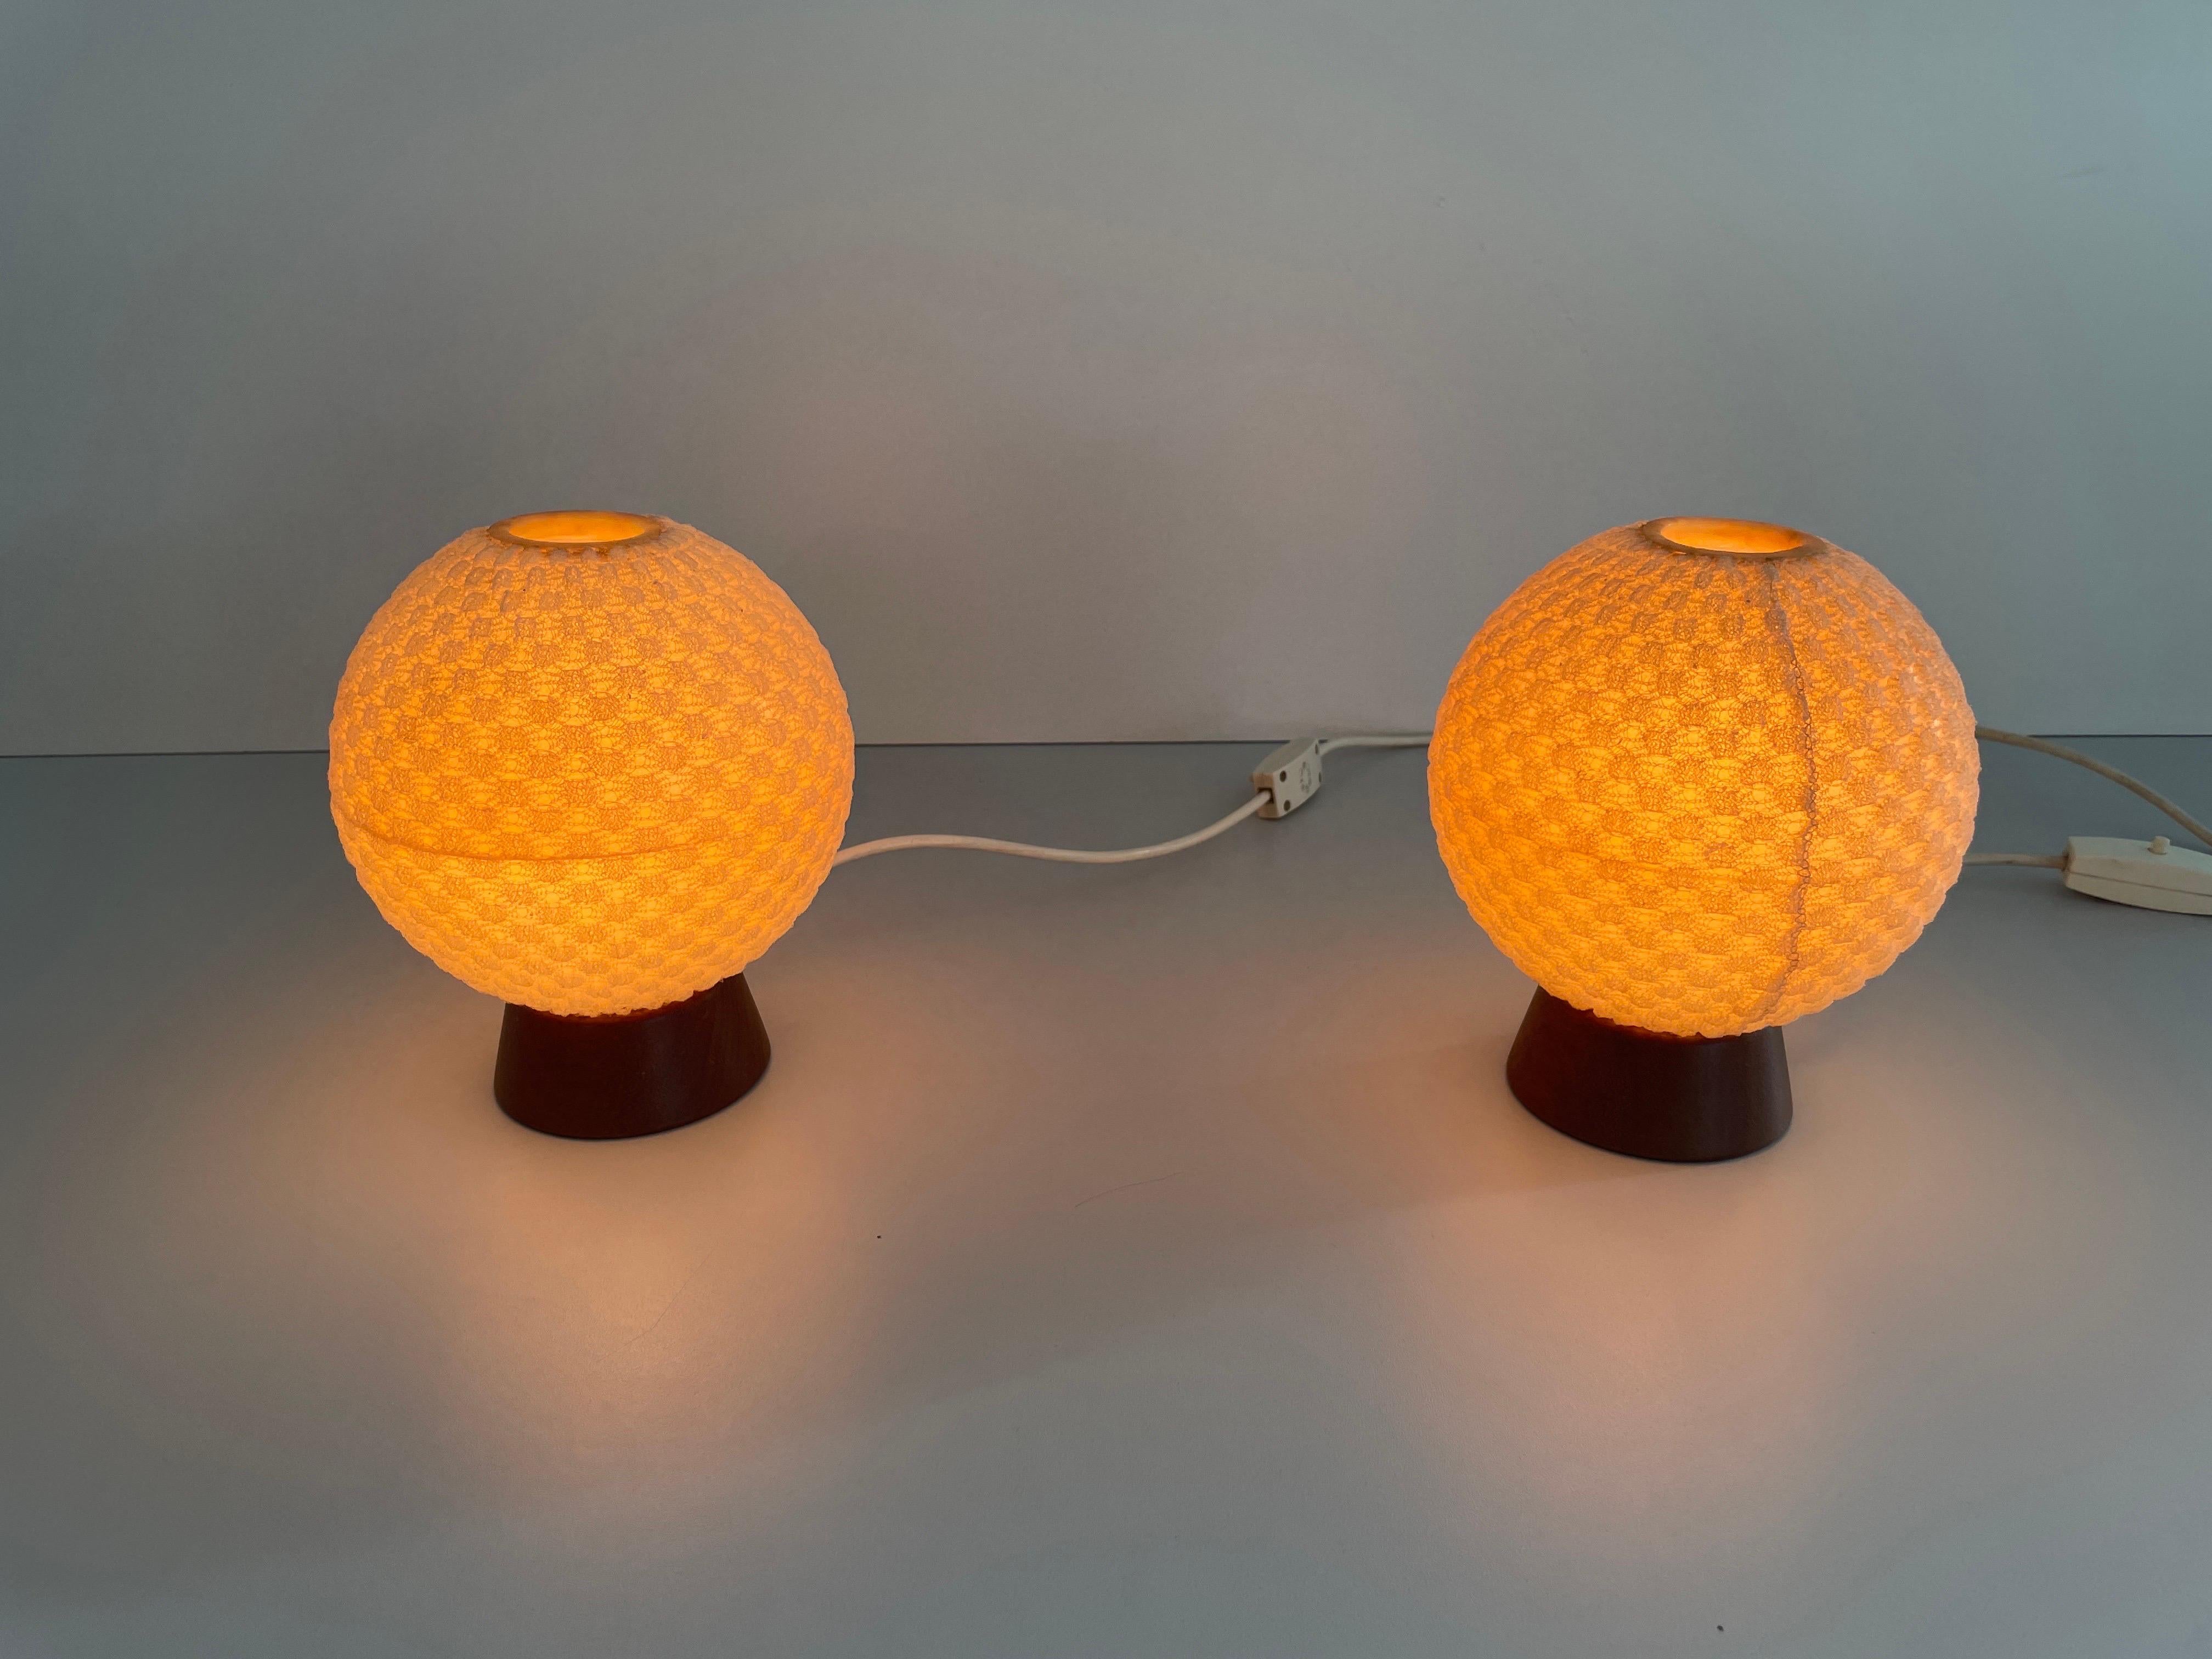 Teak & Ball Fabric Shade Pair of Bedside Lamps by Temde, 1960s Germany For Sale 6